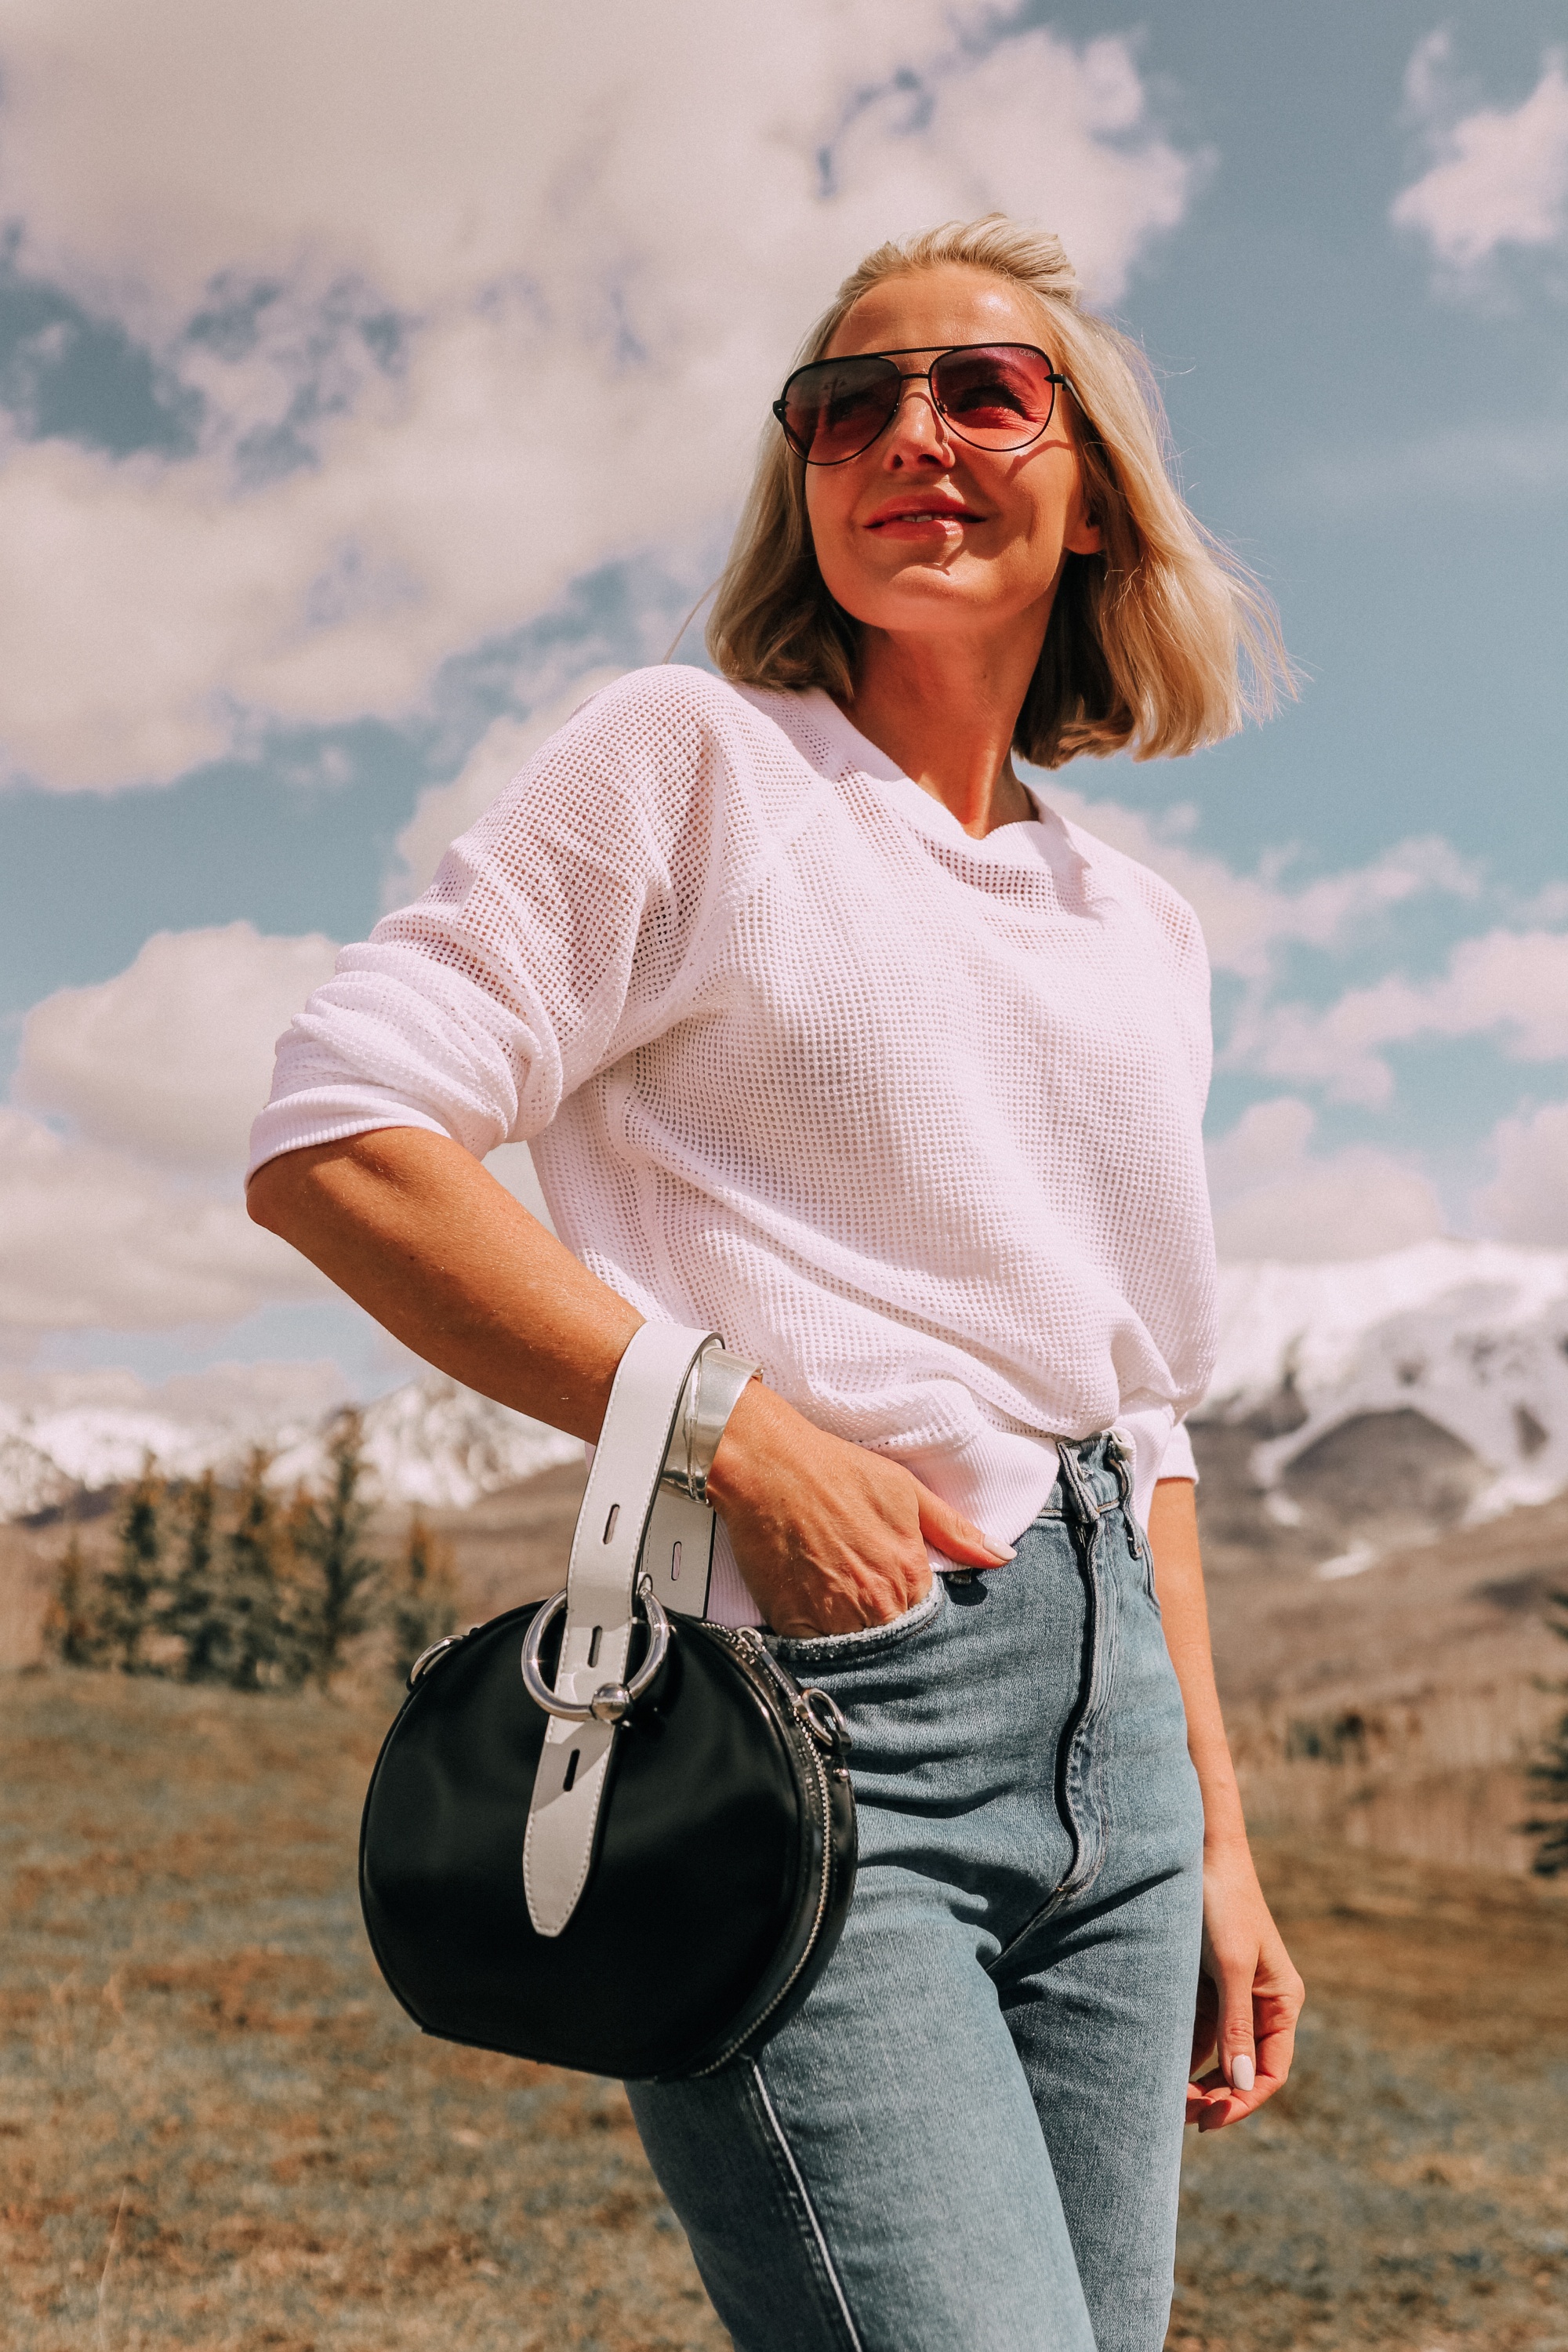 Lightweight Sweater For Summer, Fashion blogger Erin Busbee of BusbeeStyle.com wearing a white sweater by Eileen Fisher, with AGOLDE jeans, white Stuart Weitzman booties, and a black and white Rebecca Minkoff bag from Bloomingdale's in Telluride, CO